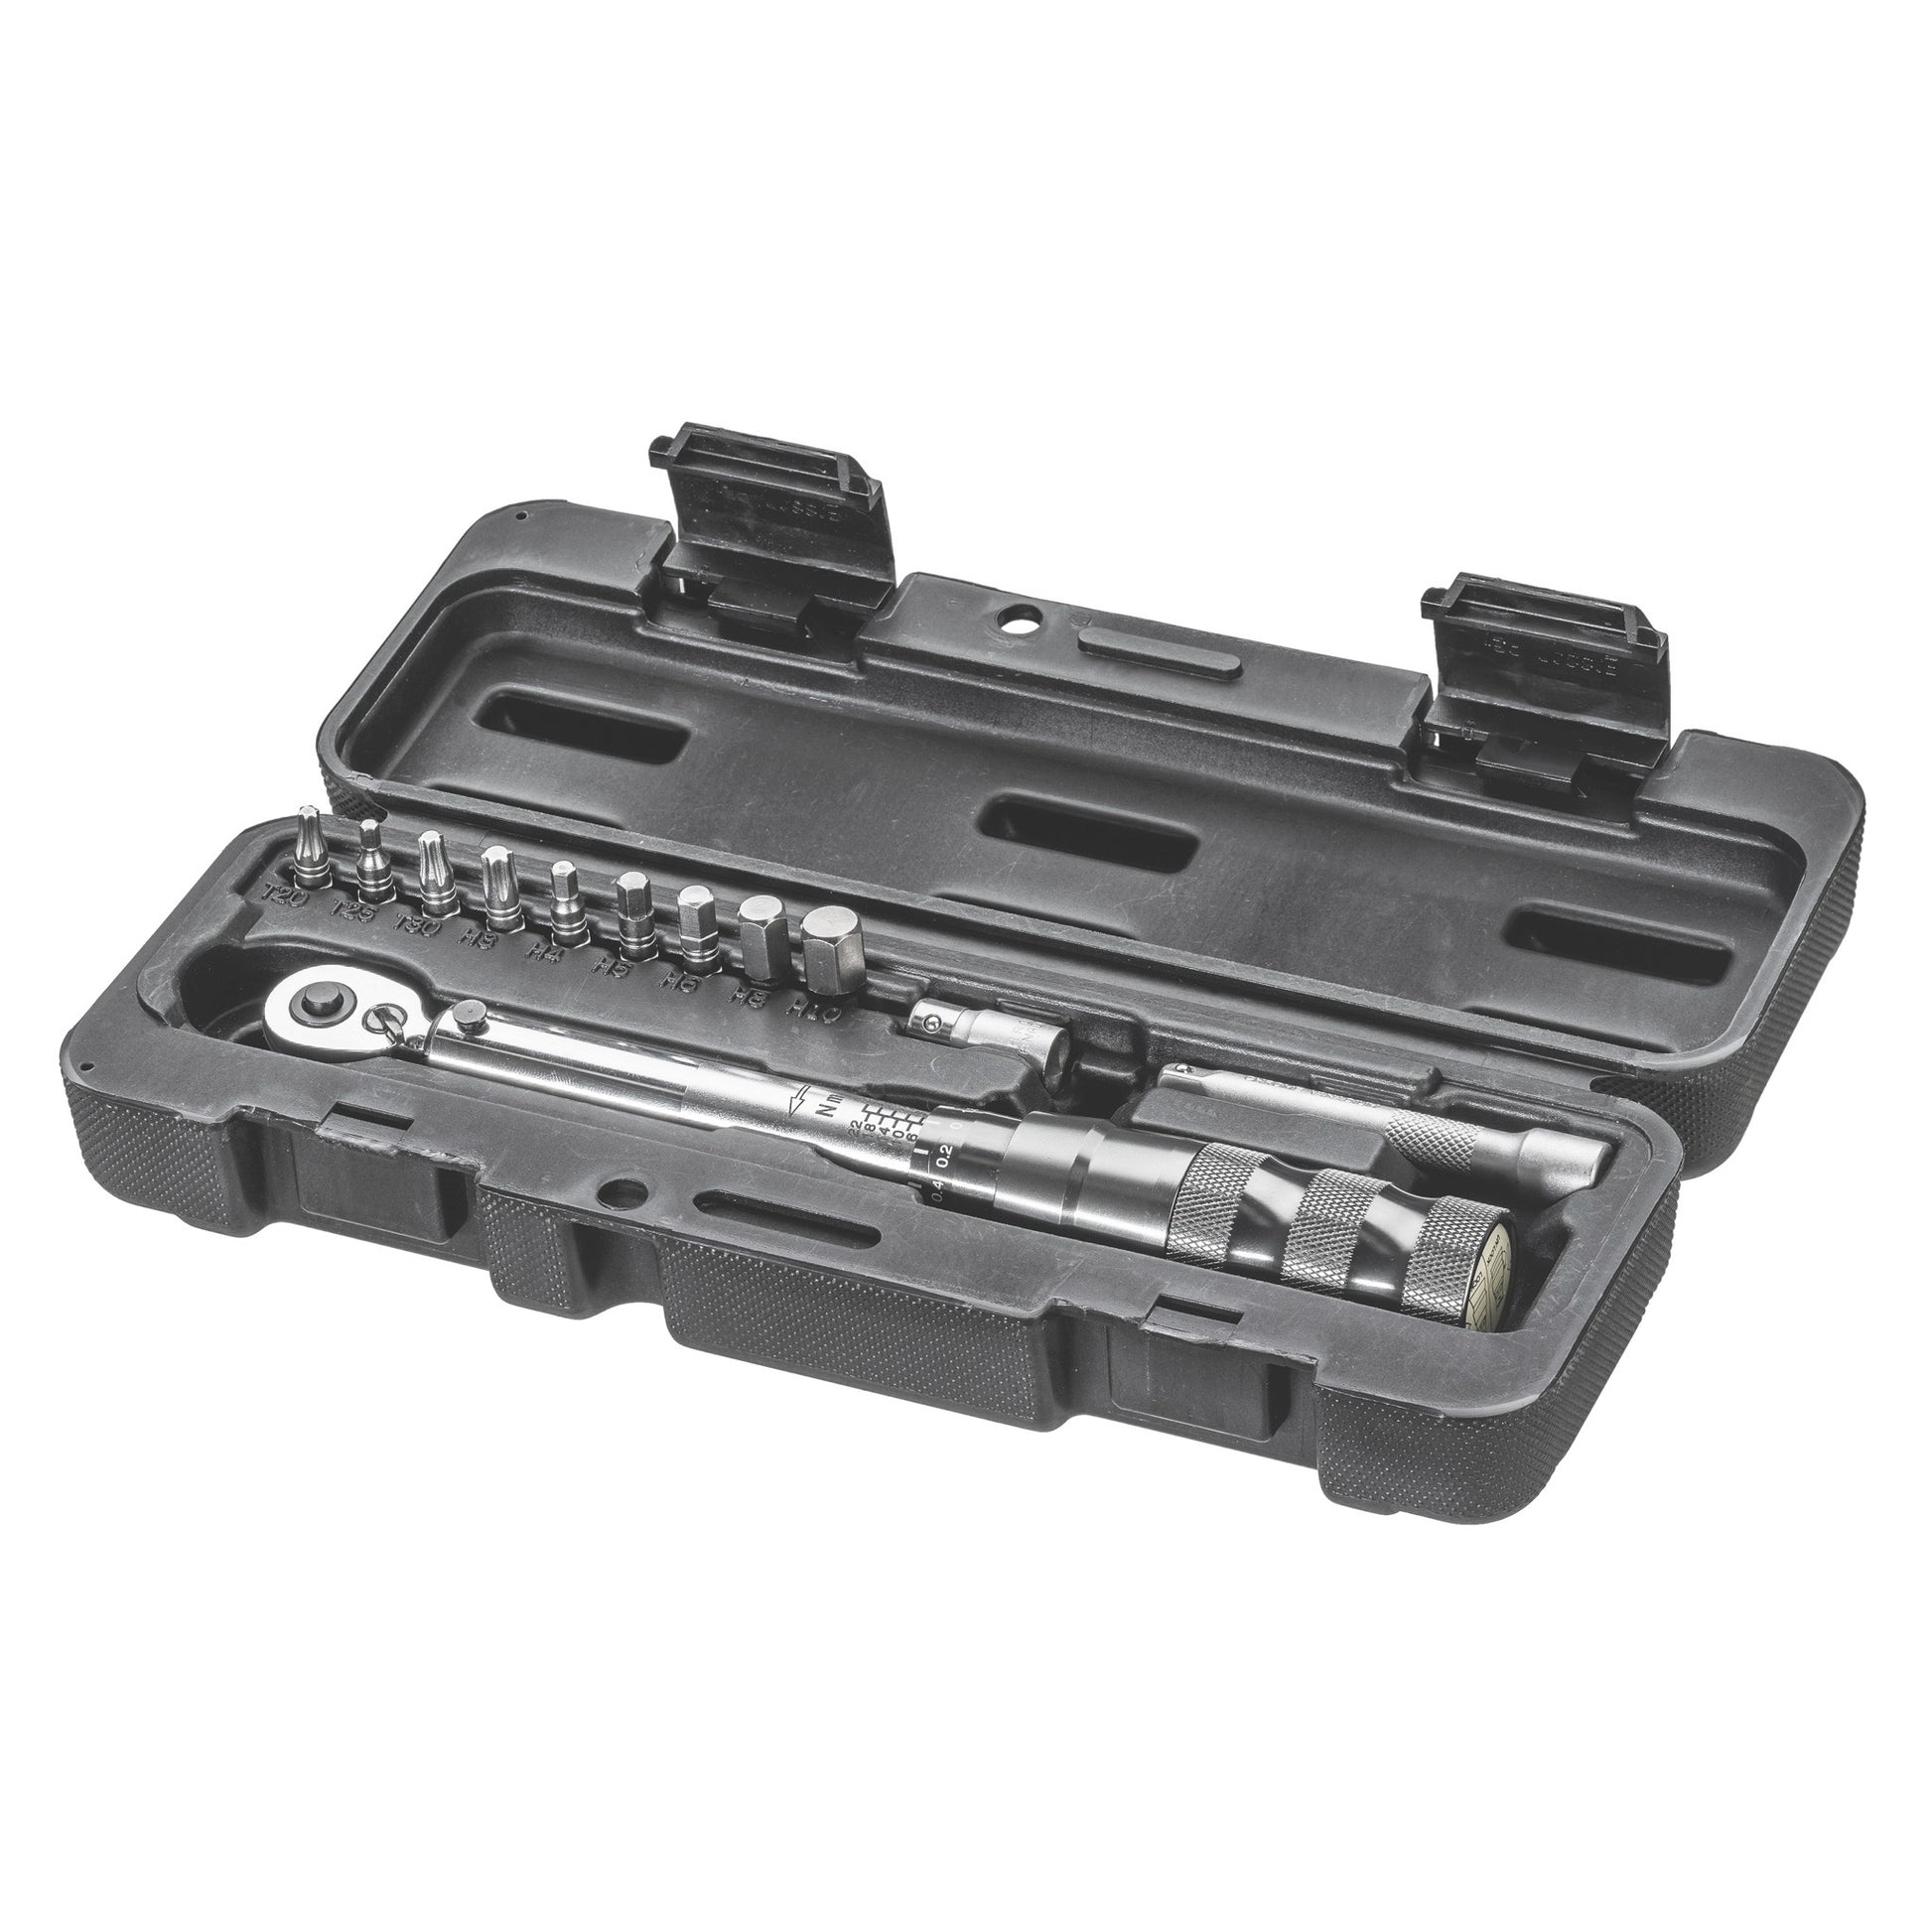 Syncros Torque Wrench Set 2.0 buy online at Woolys Wheels